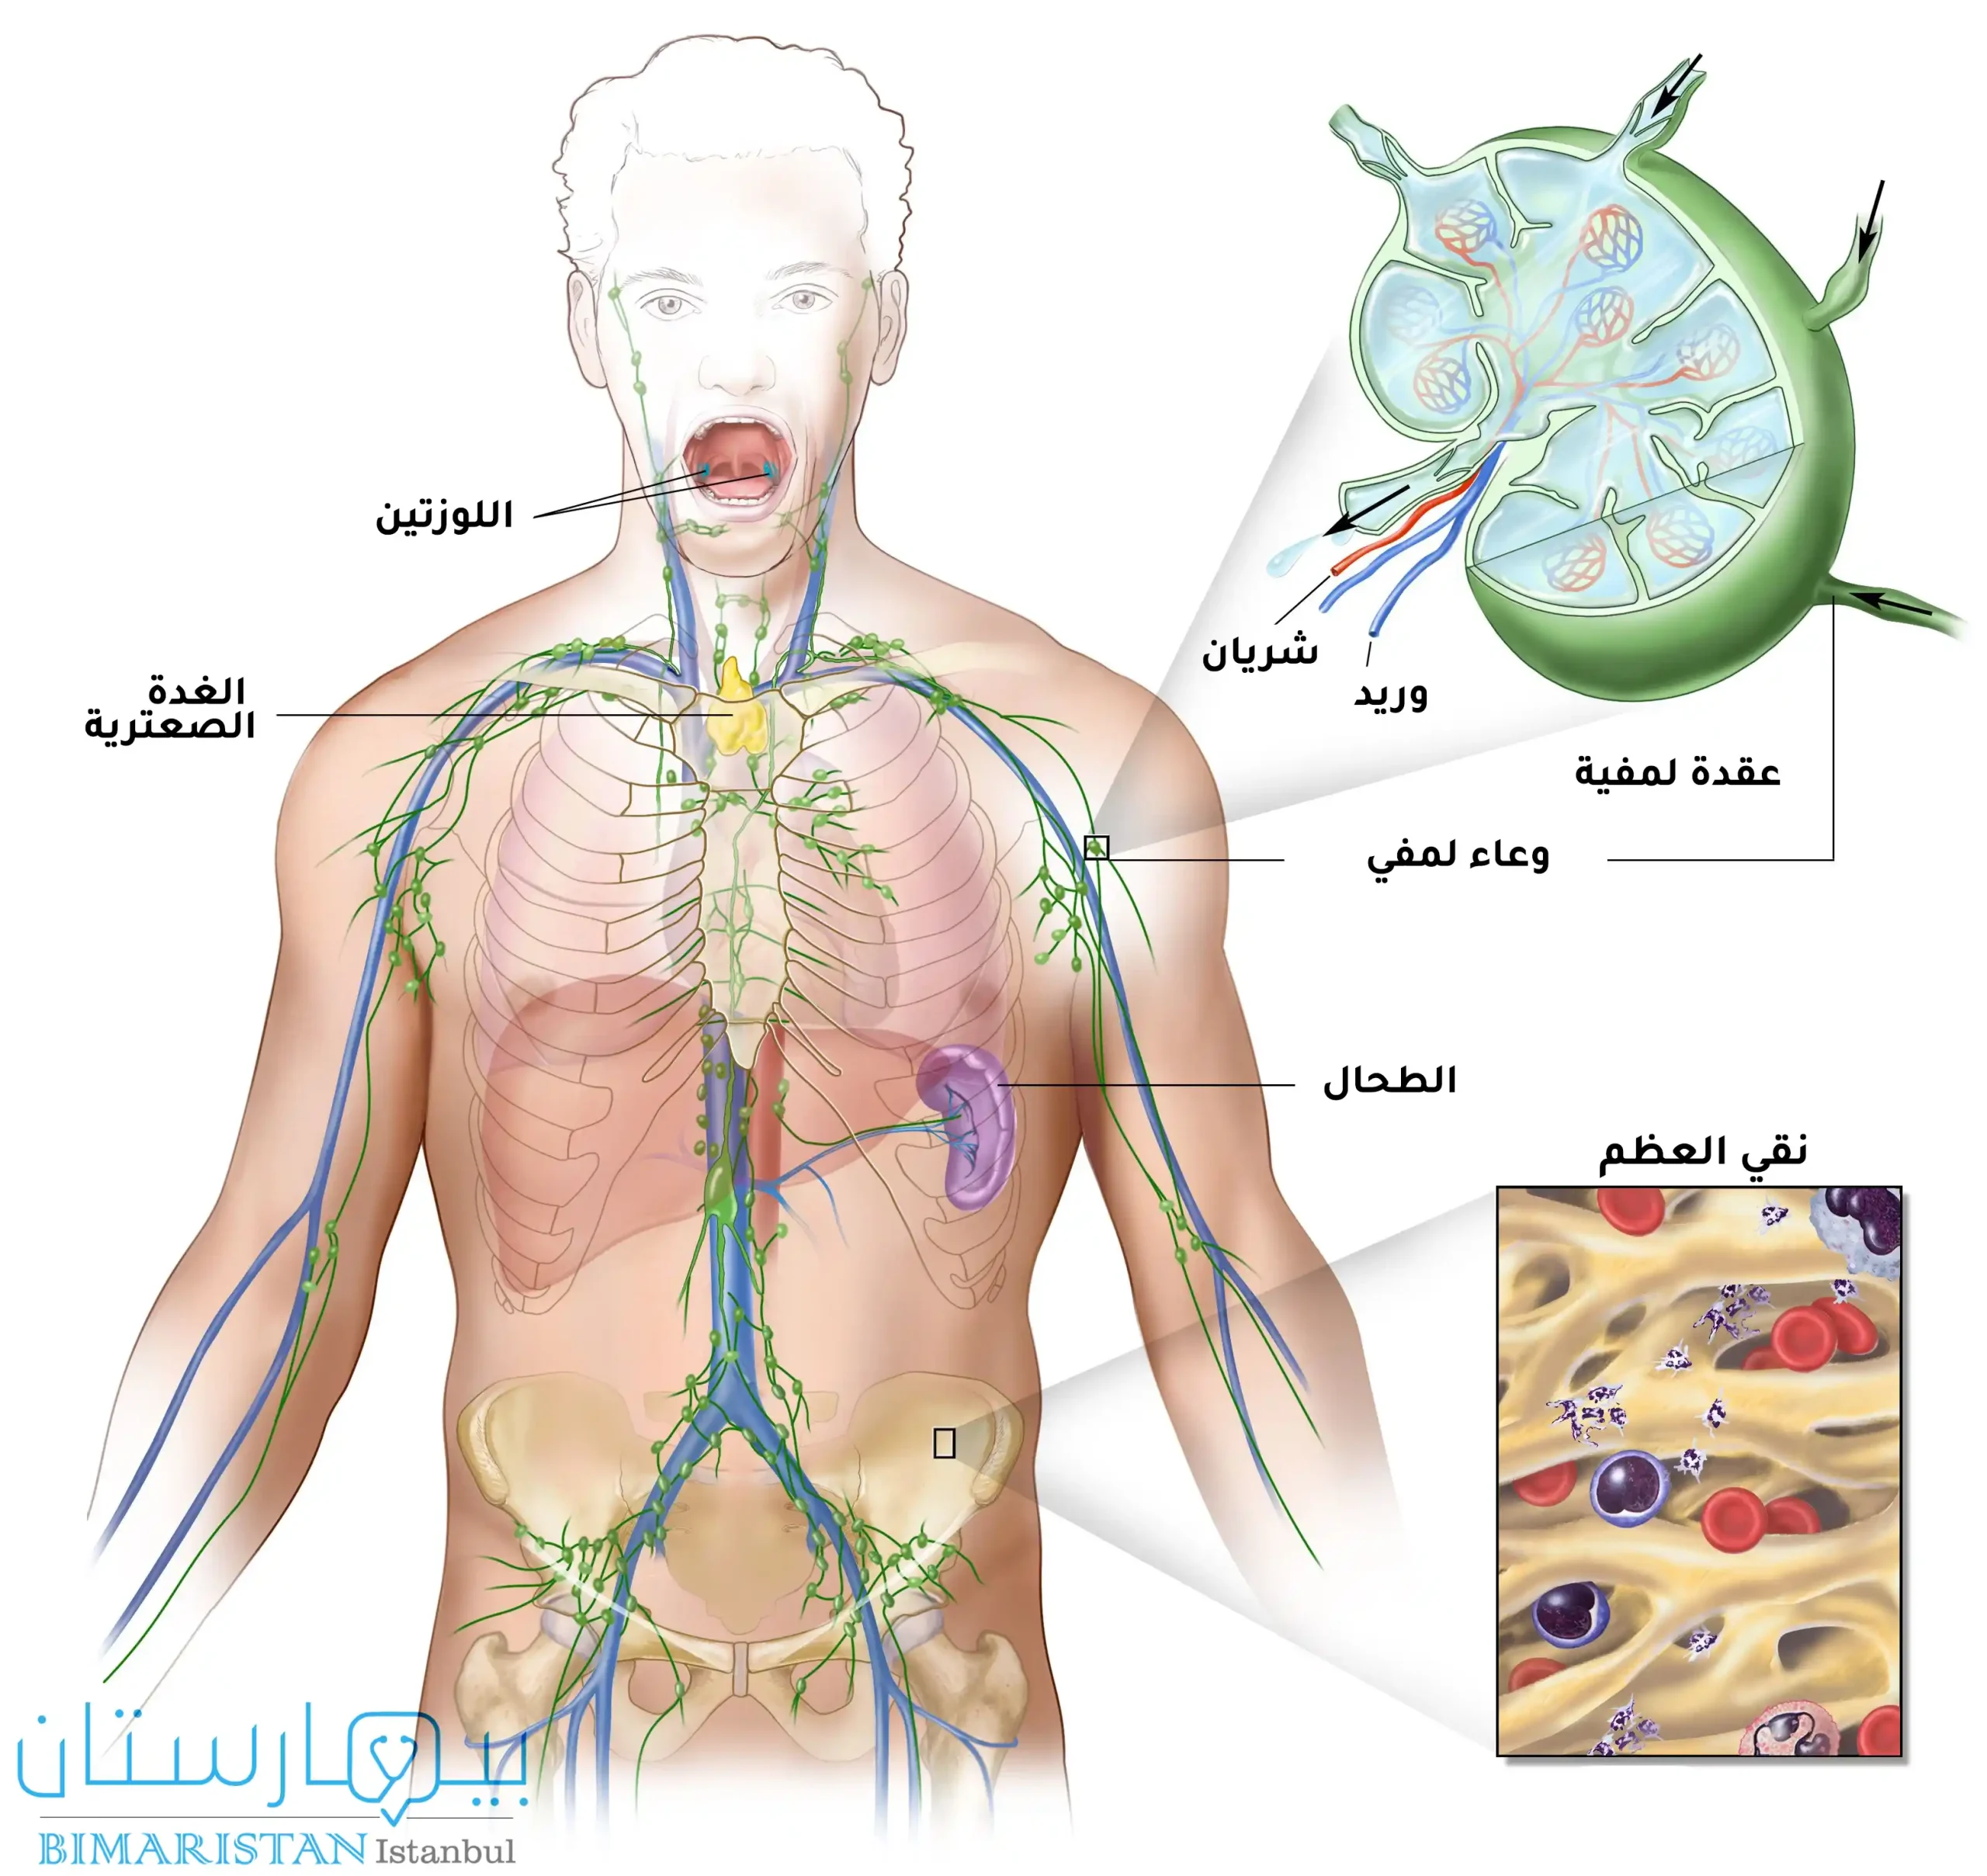 Picture showing the lymphatic system, lymph node, and bone marrow